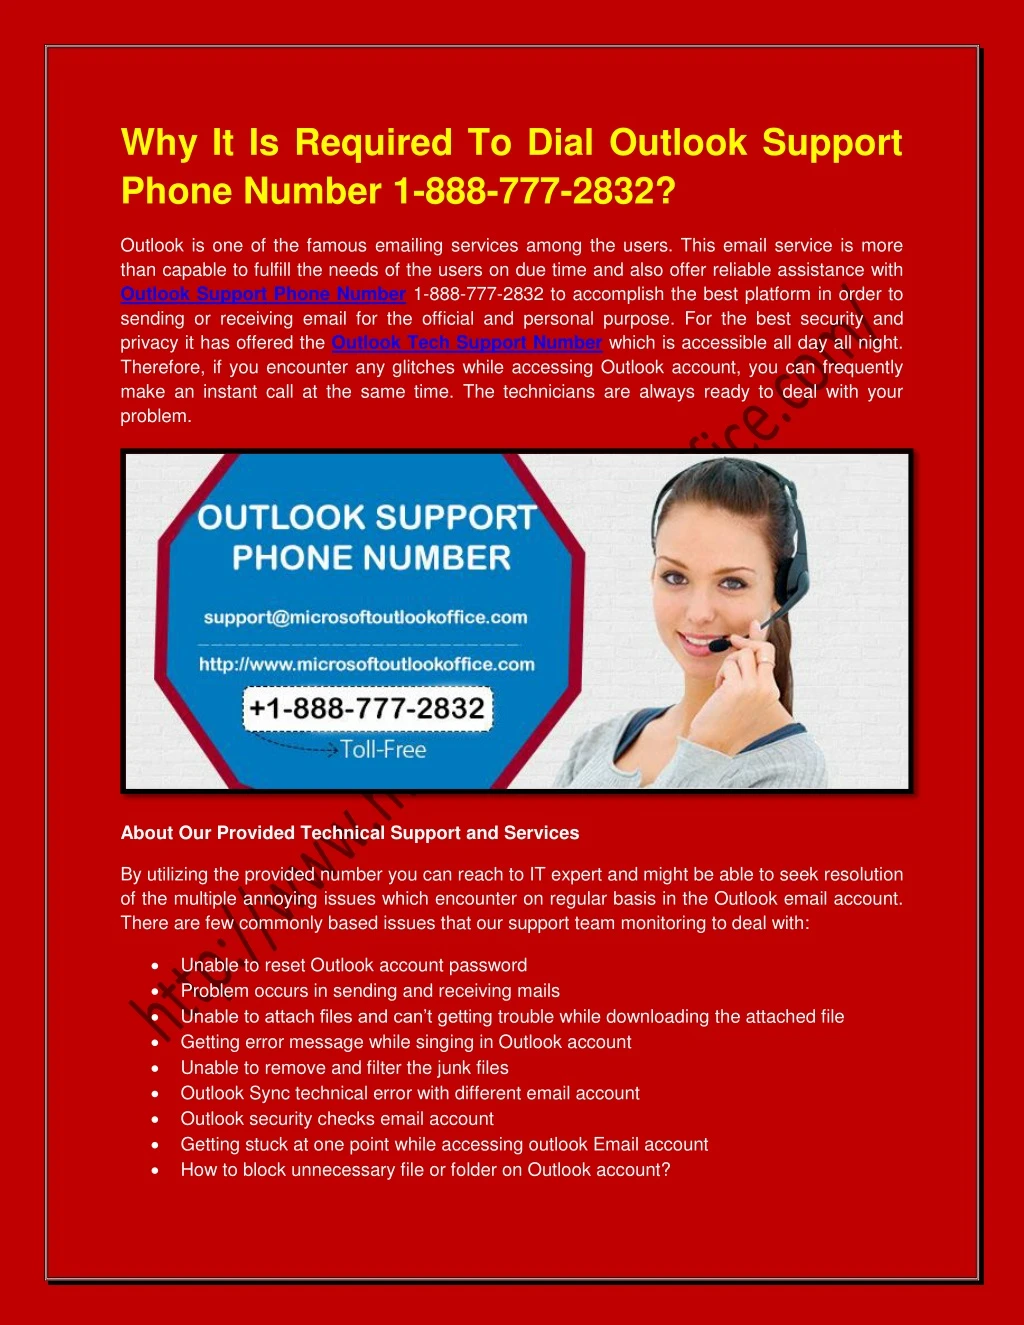 why it is required to dial outlook support phone